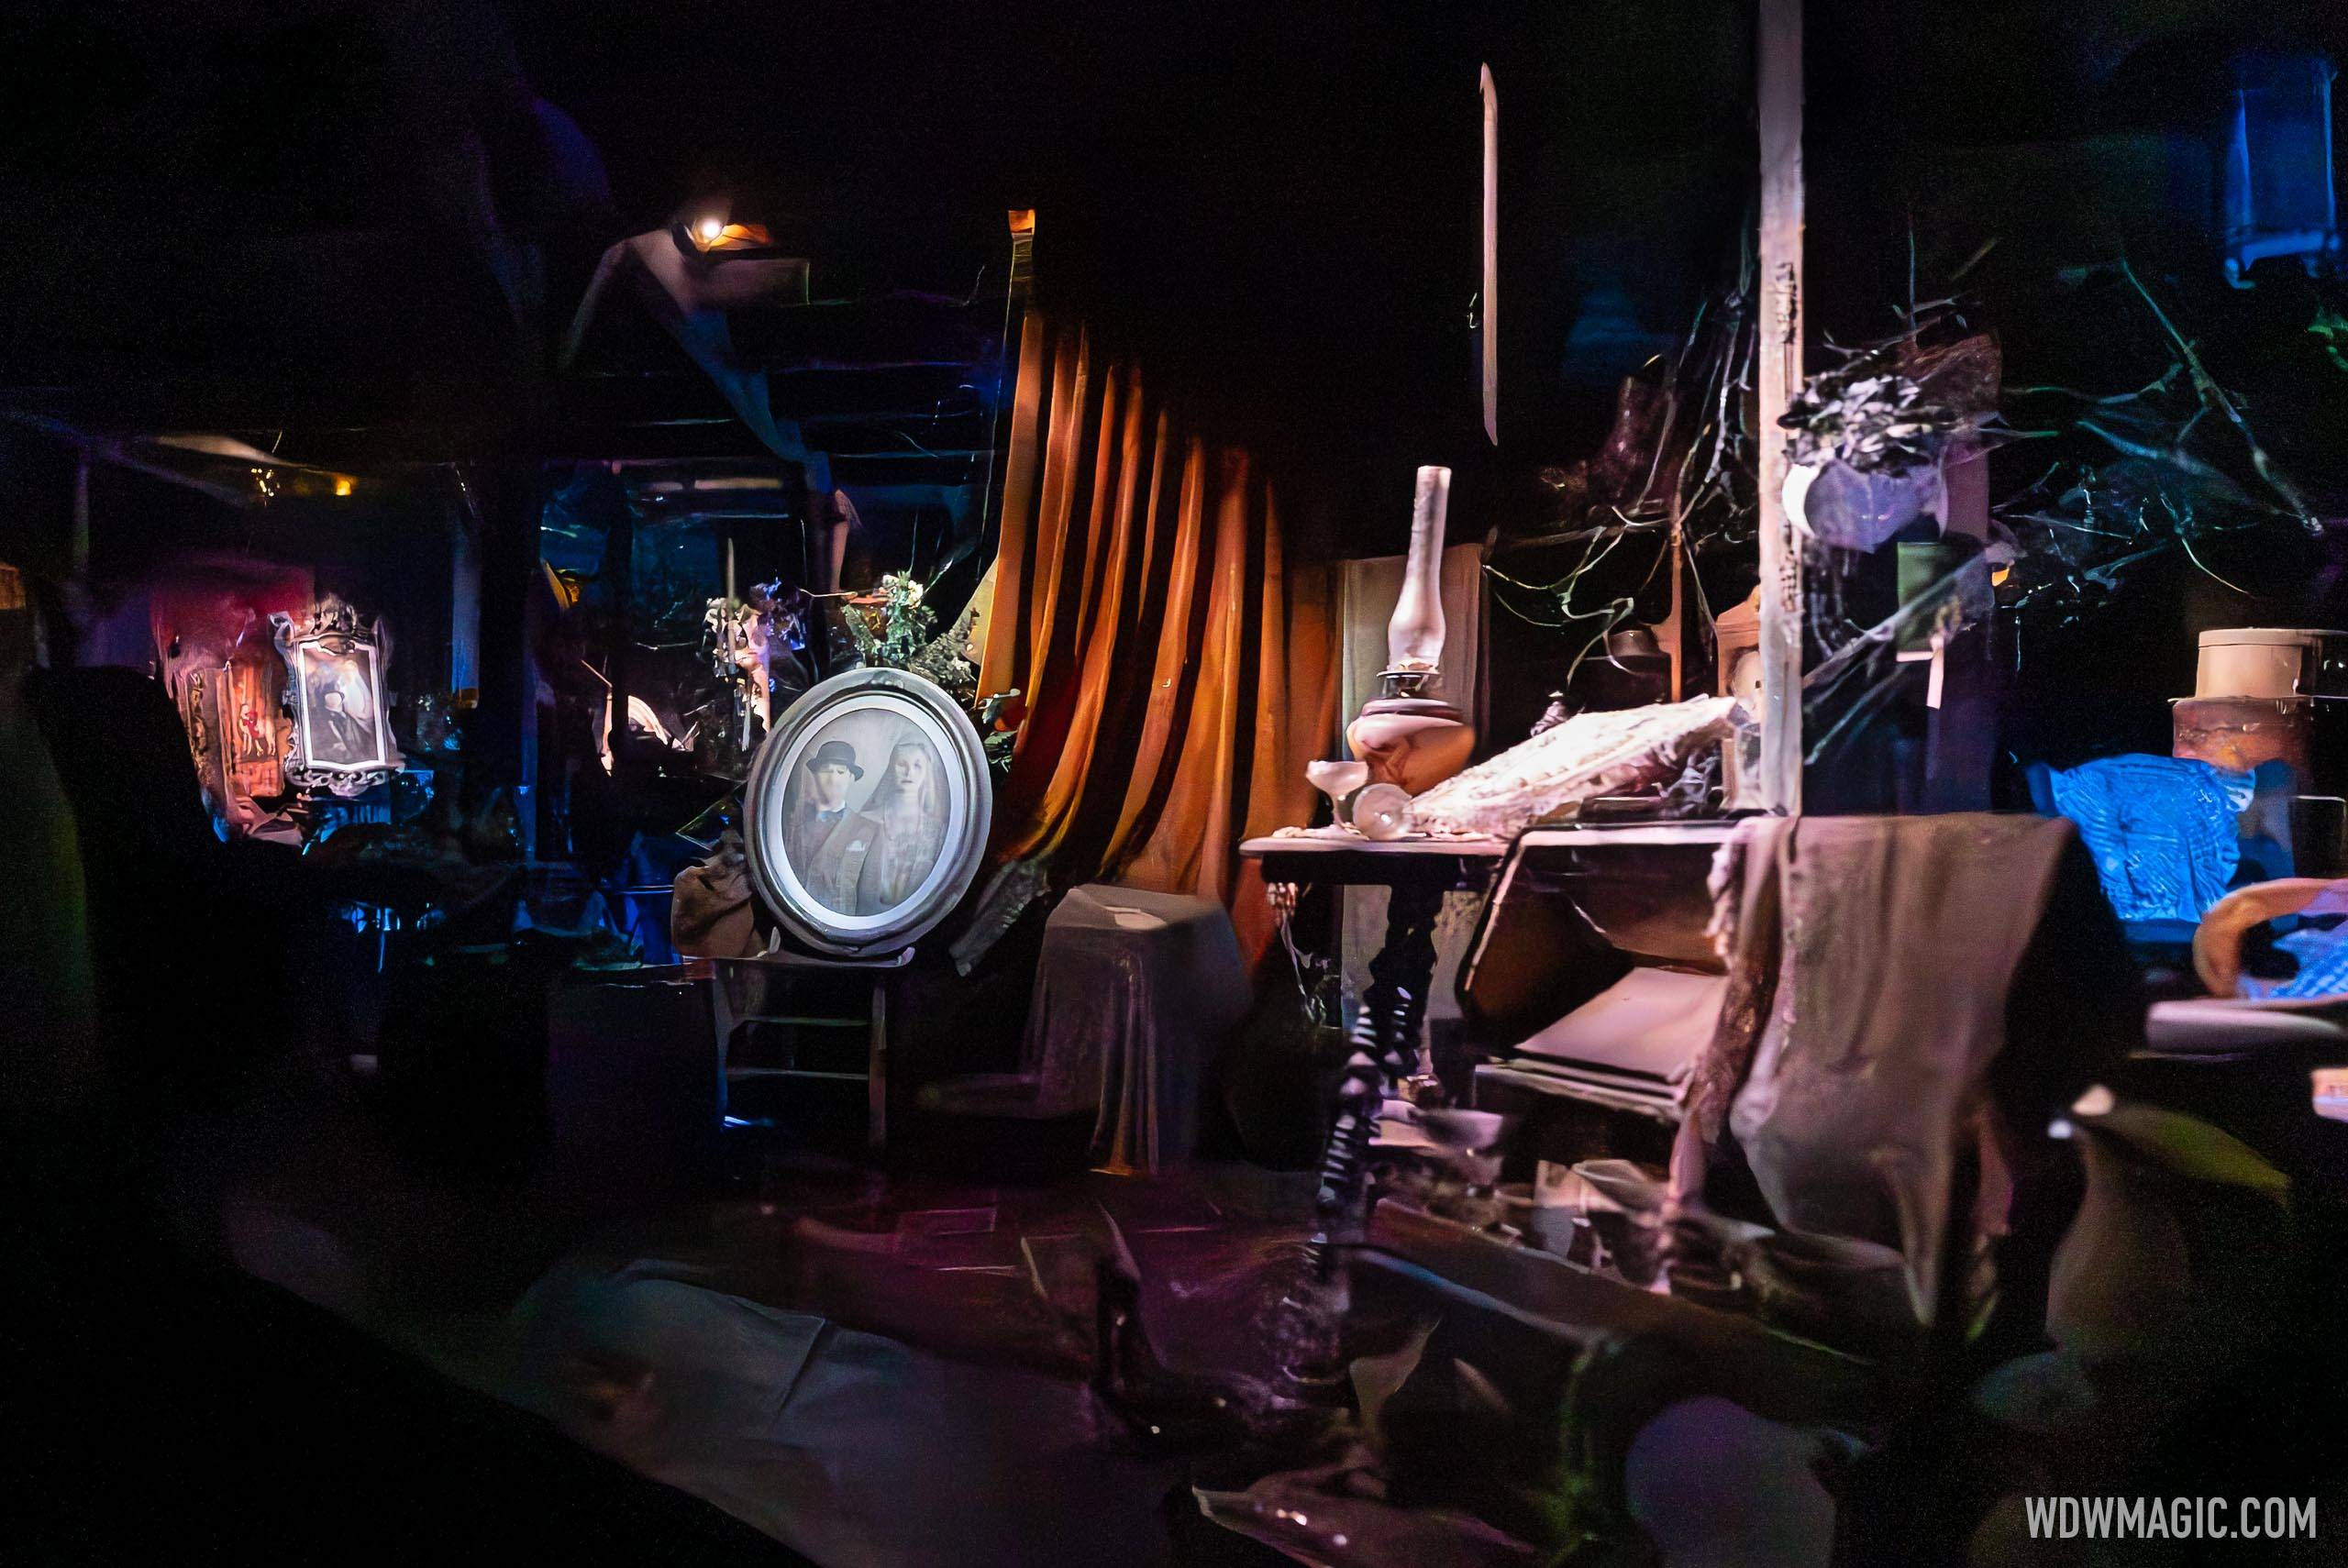 Haunted Mansion returns to normal operation at the Magic Kingdom